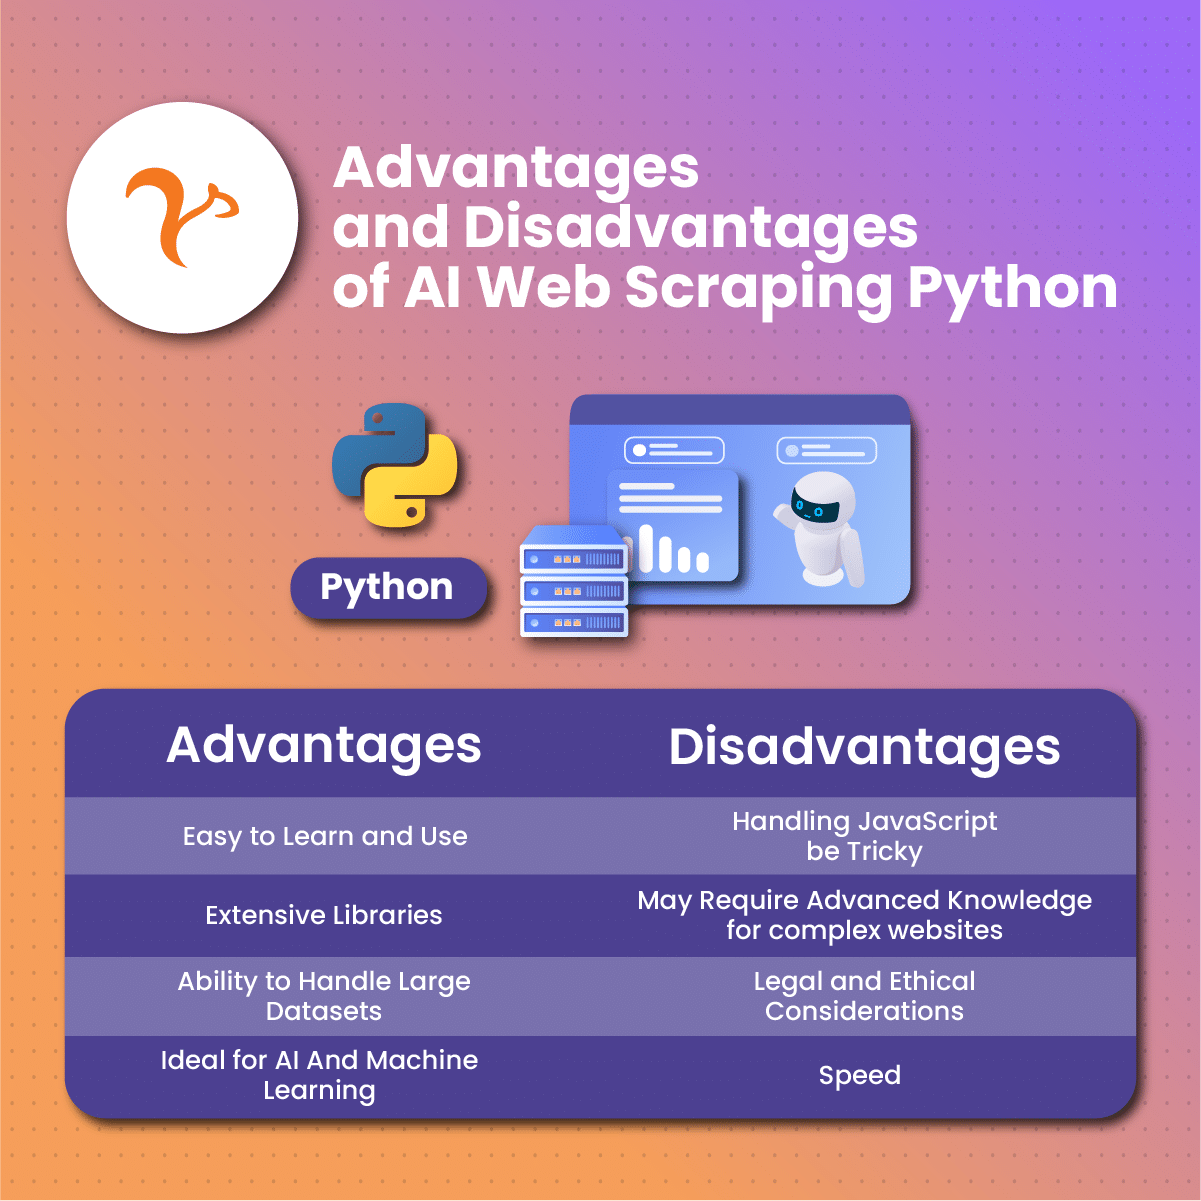 Advantages and Disadvantages of AI Web Scraping Python